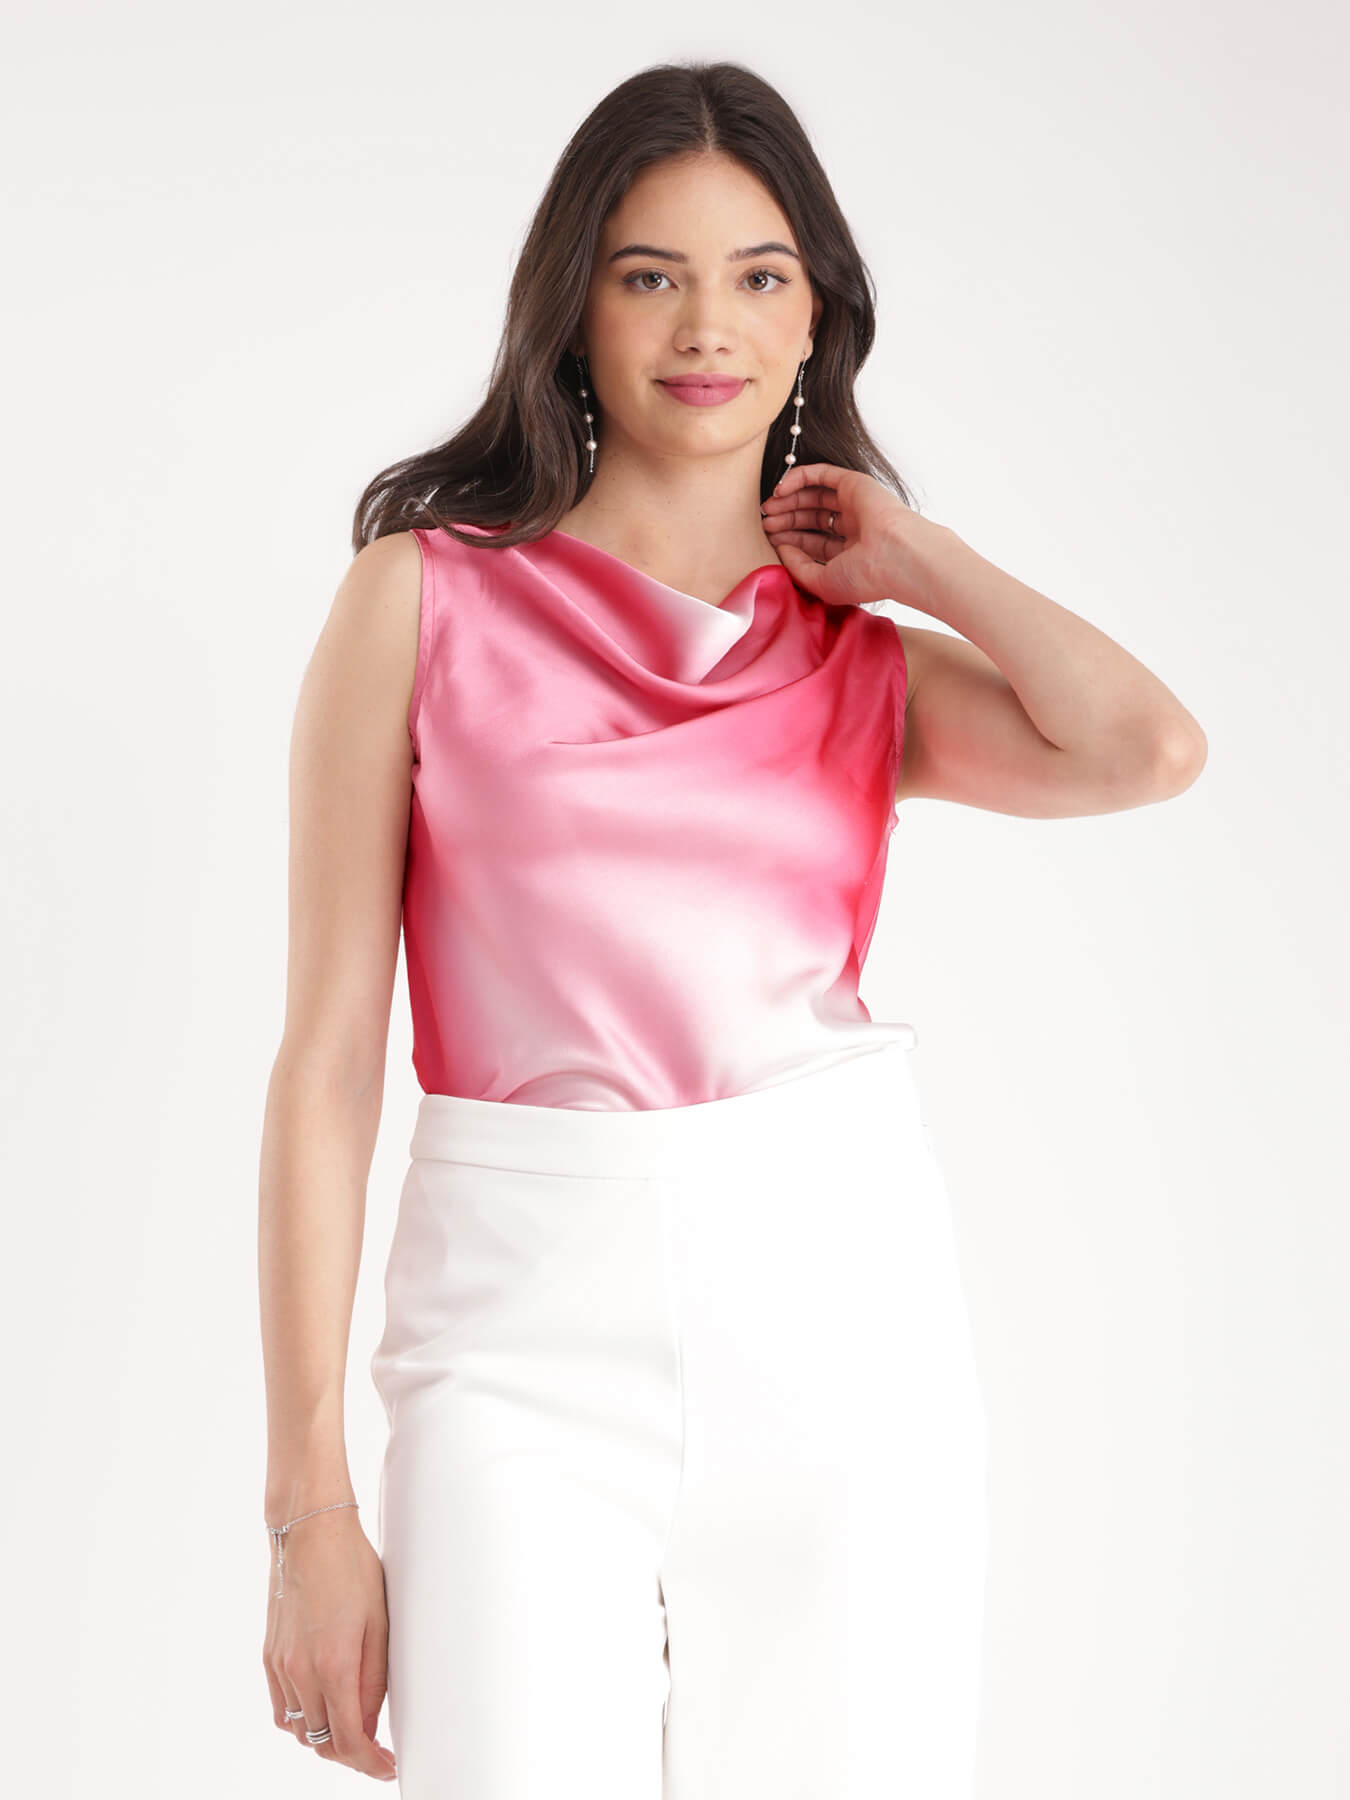 Satin Ombre Top - Pink And White